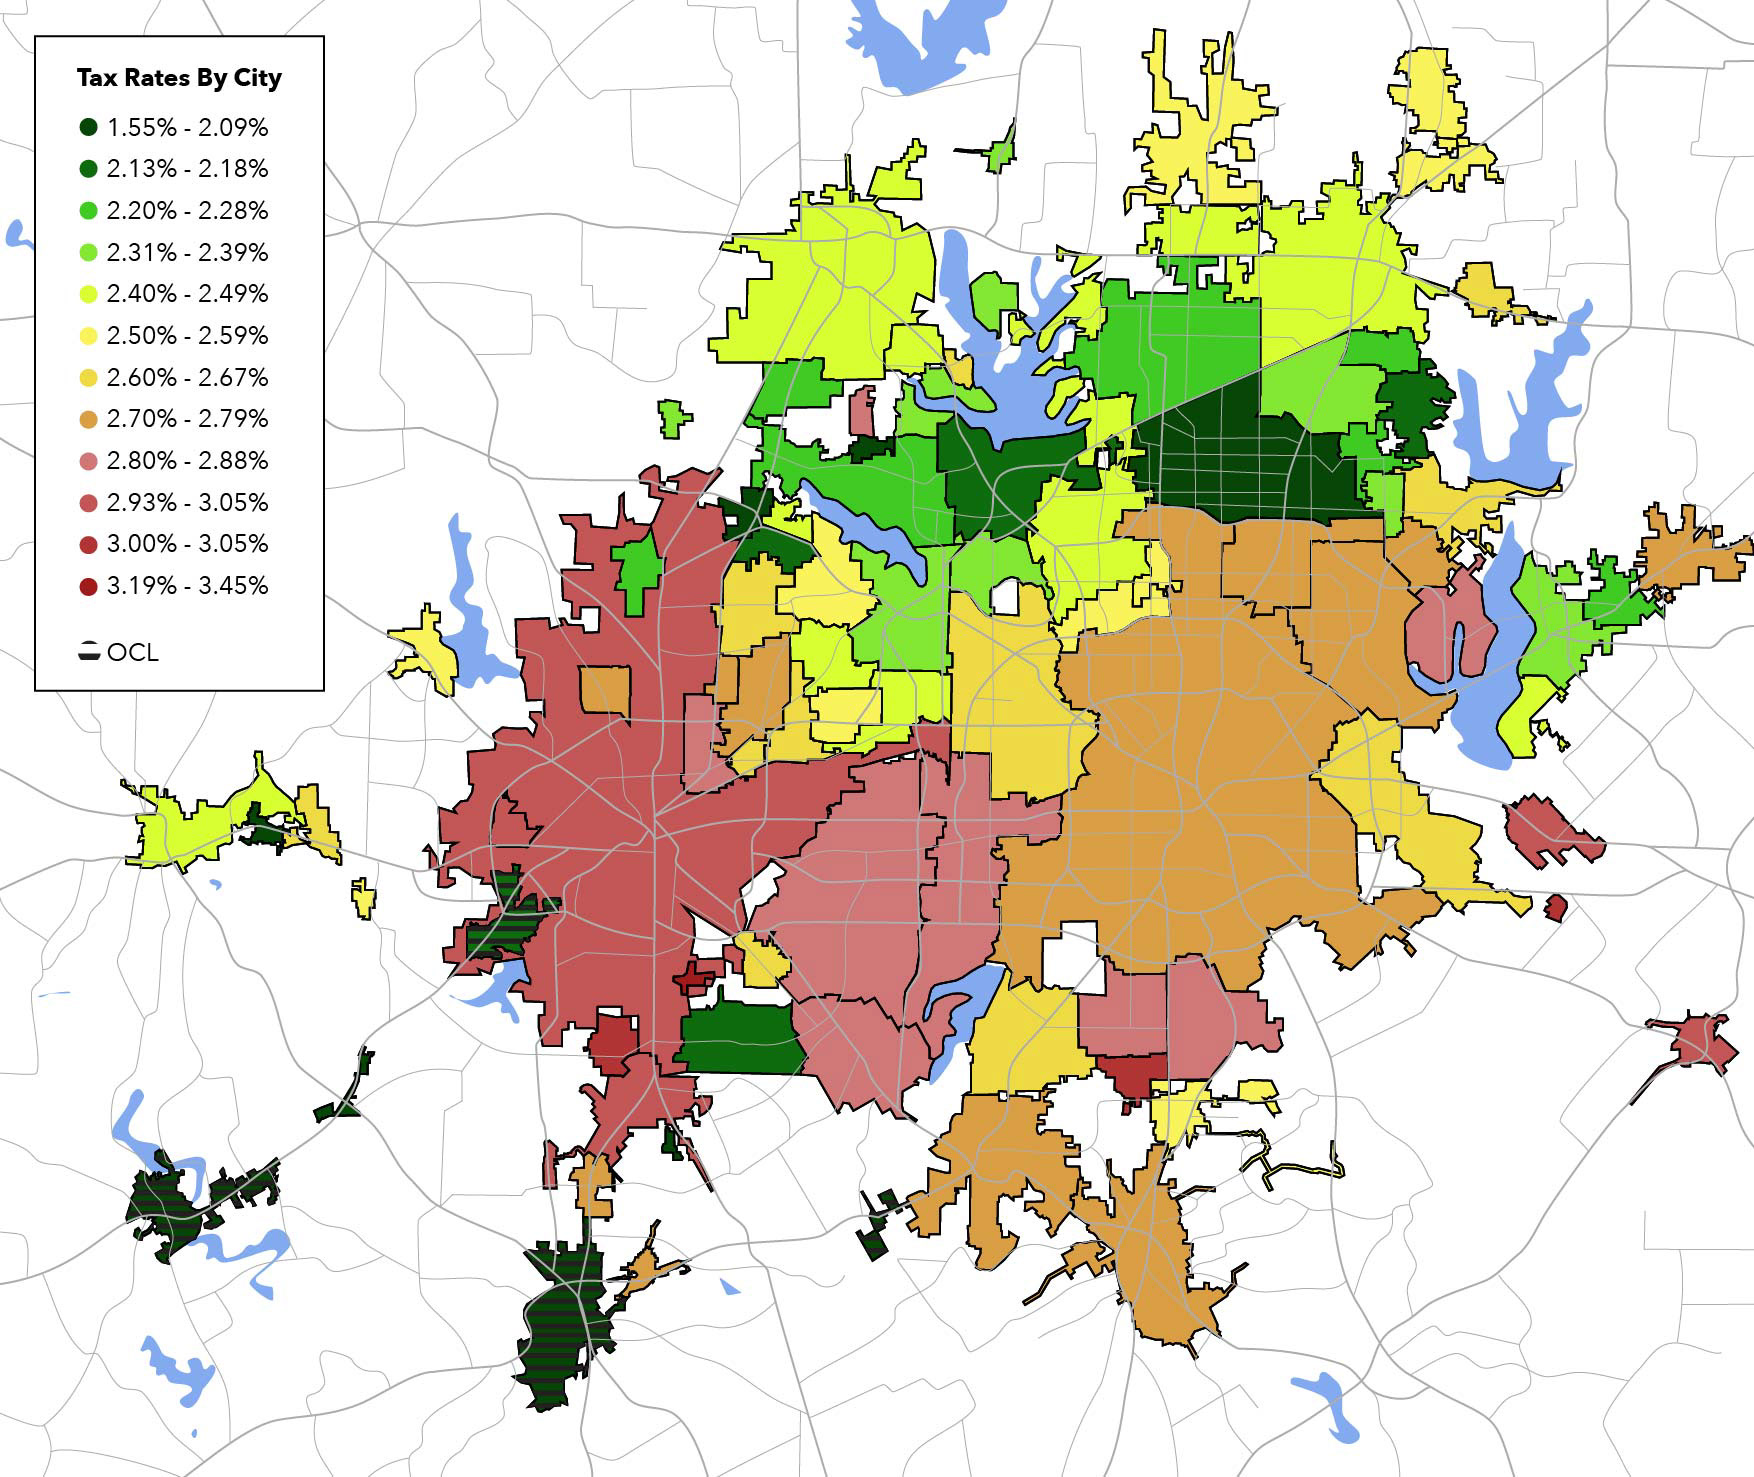 texas-tax-rates-map-on-behance